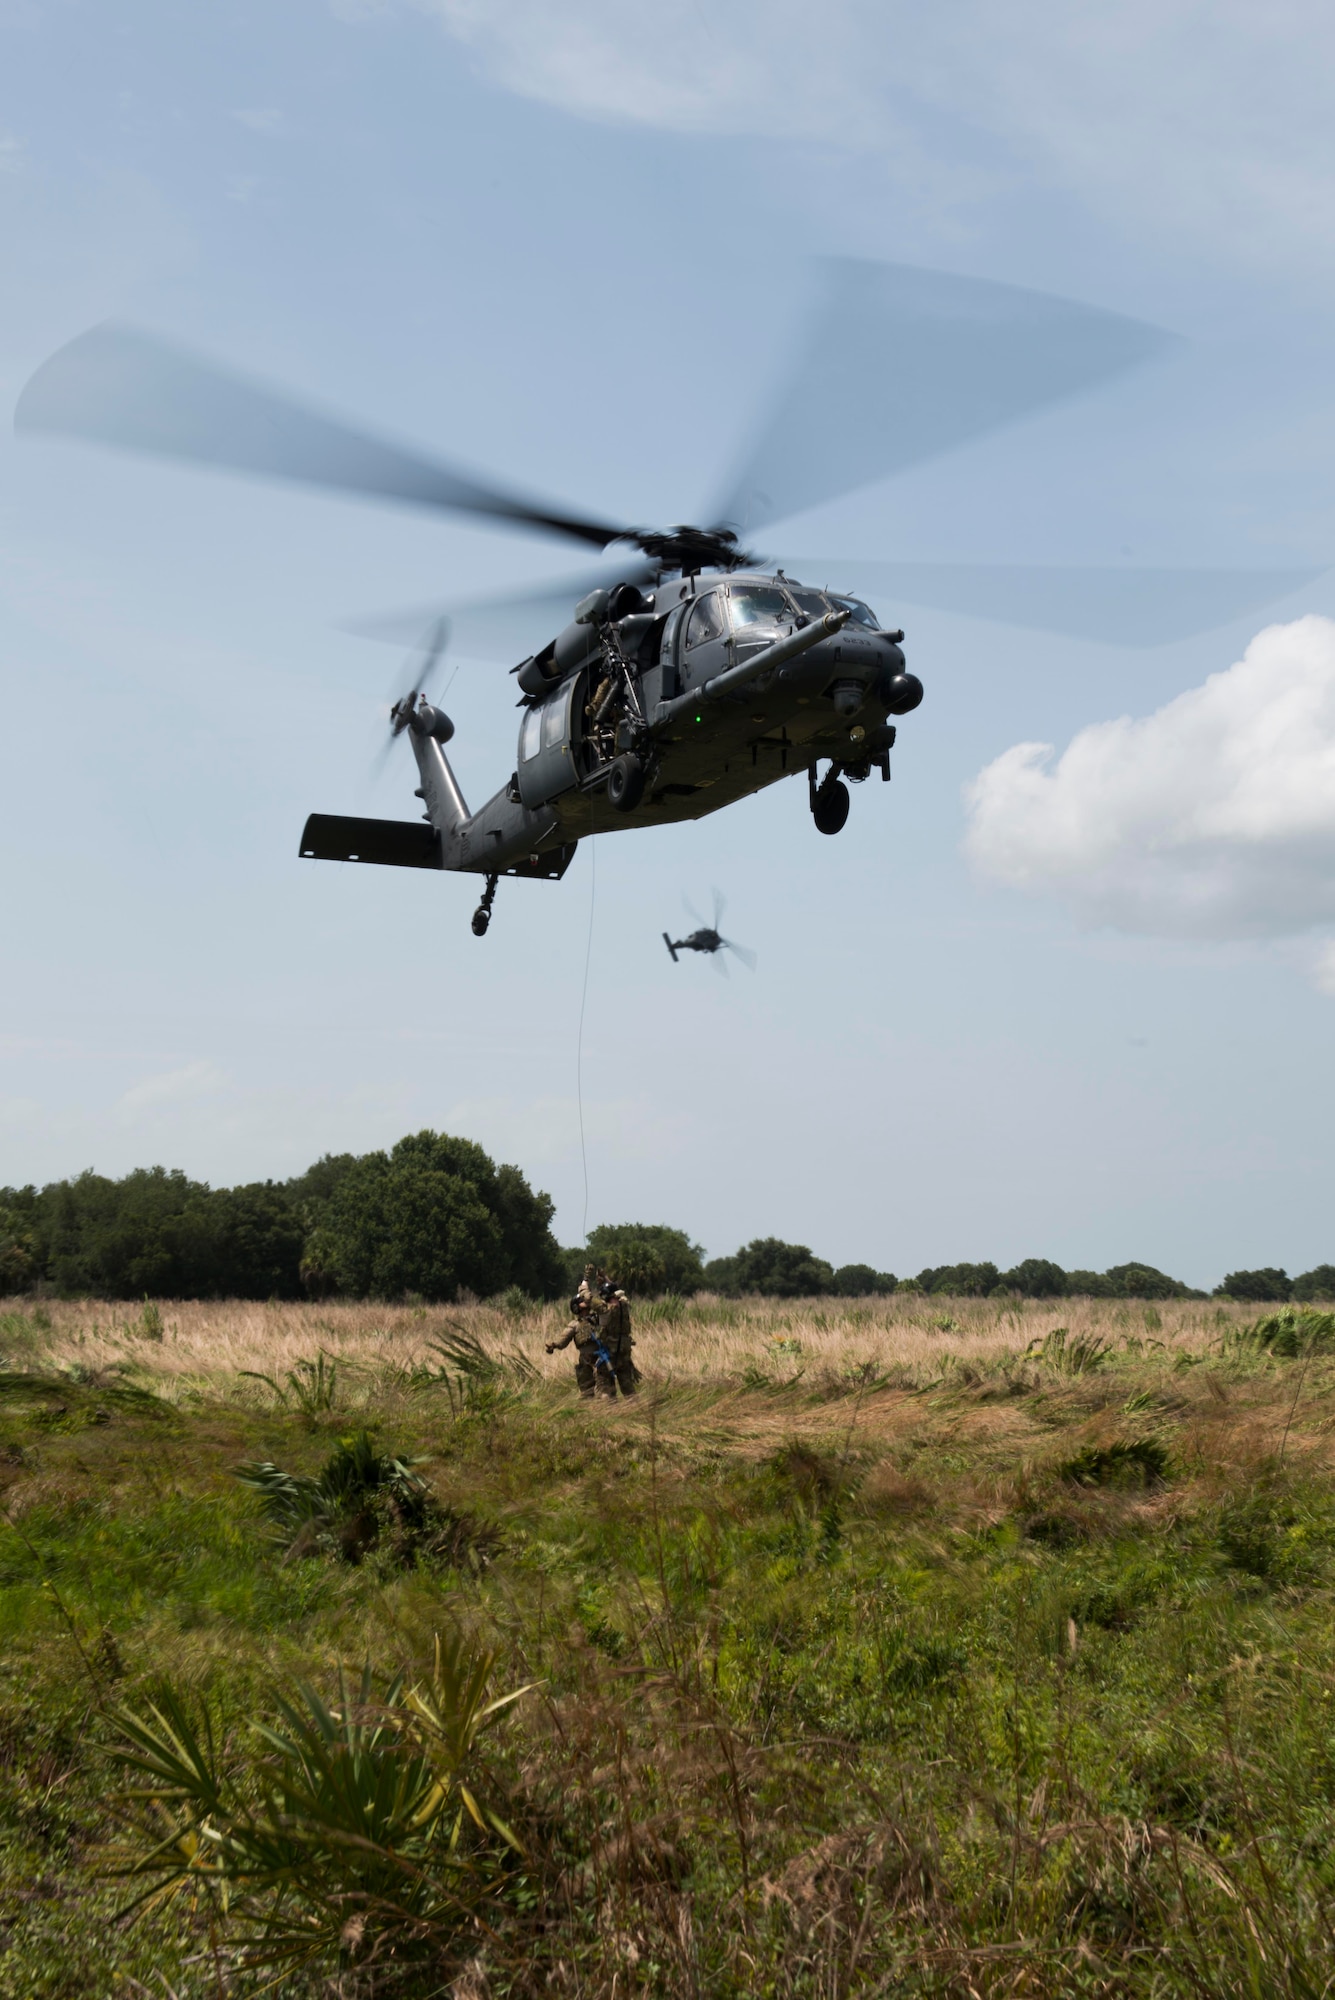 Pararescuemen from the 920th Rescue Wing, Patrick Air Force Base, Fla., climb onto a rope before being hoisted into an HH-60G Pave Hawk during a simulated personnel recovery scenario for Exercise DRAGON STRIKE June 11, 2015, near Avon Park Air Force Range, Fla. The scenario focused on communication between pilots and injured personnel and effective aircraft signaling to locate them. (U.S. Air Force photo by Airman 1st Class Dillian Bamman/Released)